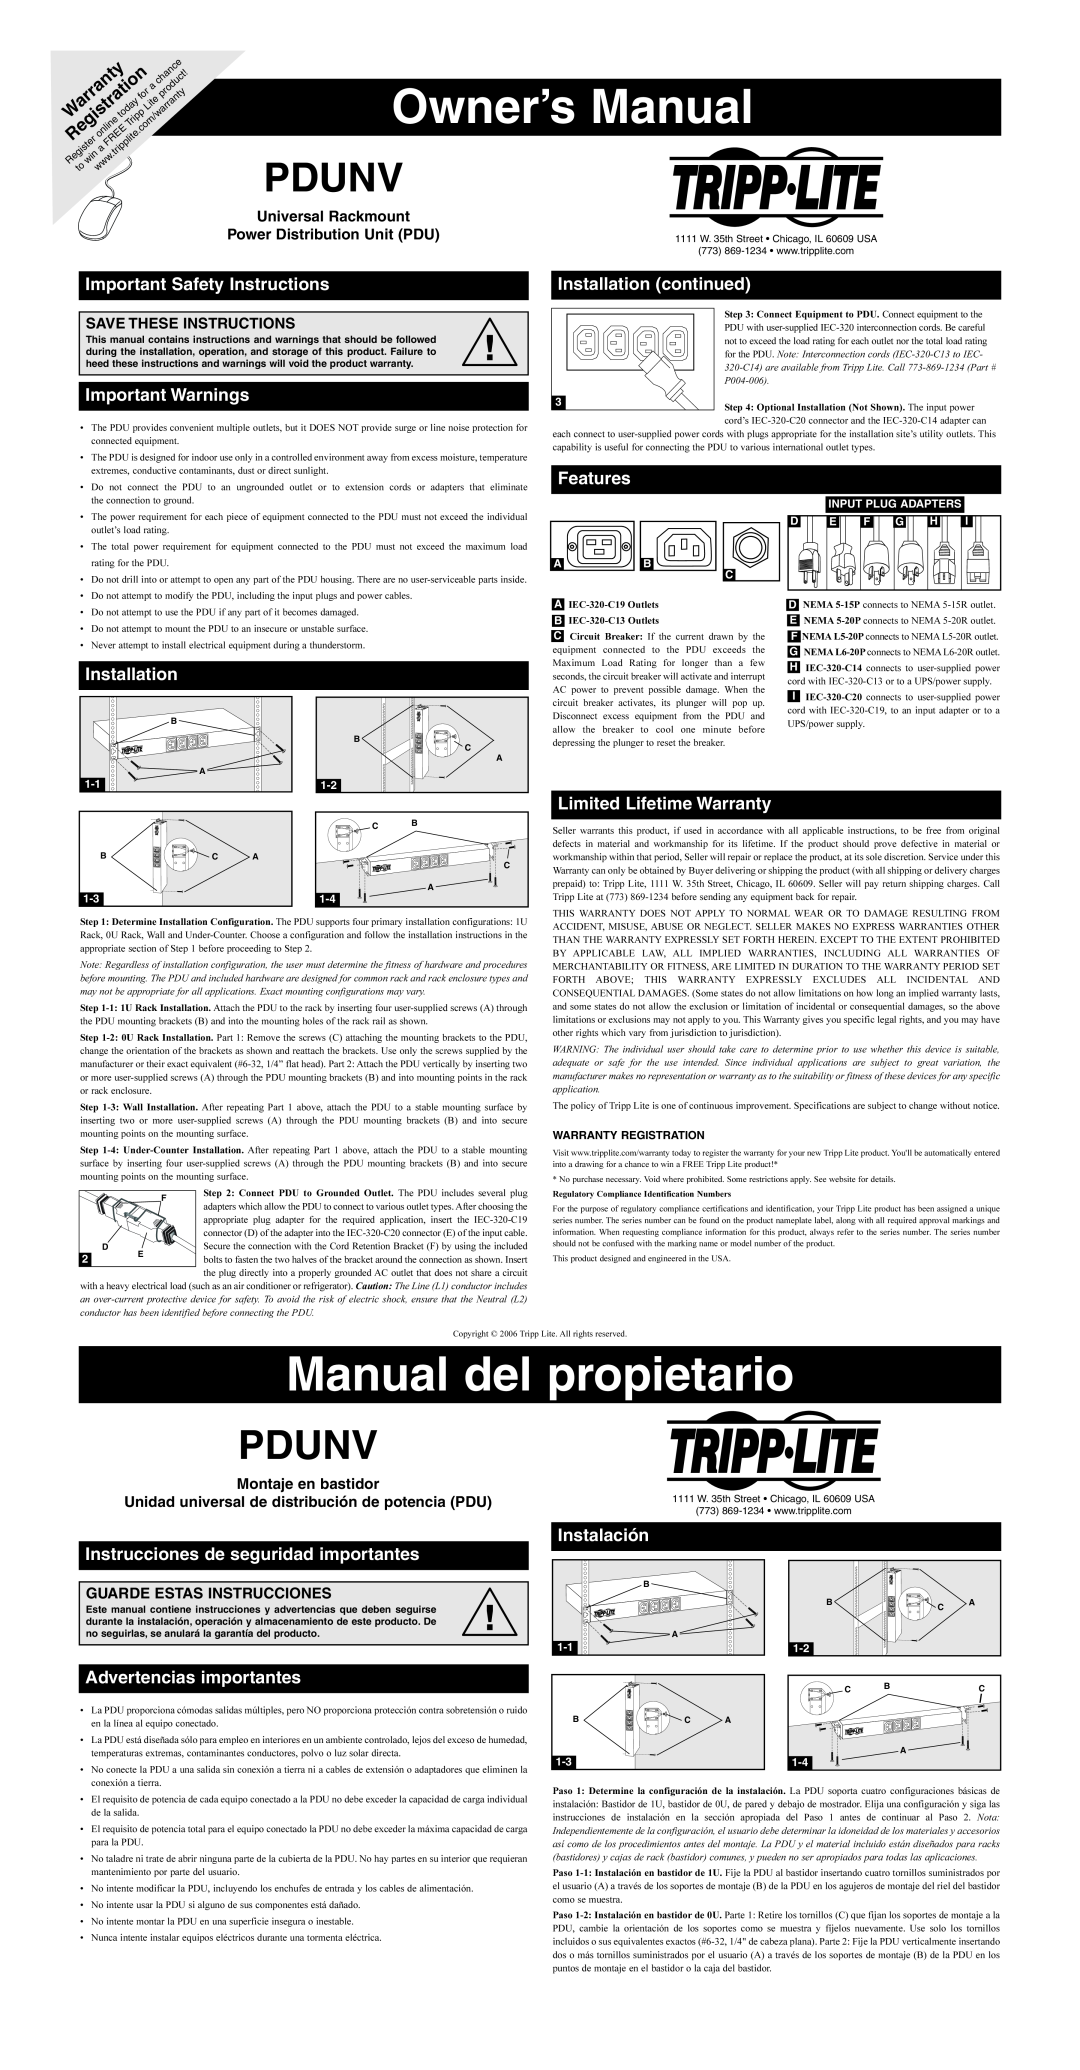 Tripp Lite PDUNV owner manual Owner’s Manual, Manual del propietario, Pdunv, Important Safety Instructions, Installation 